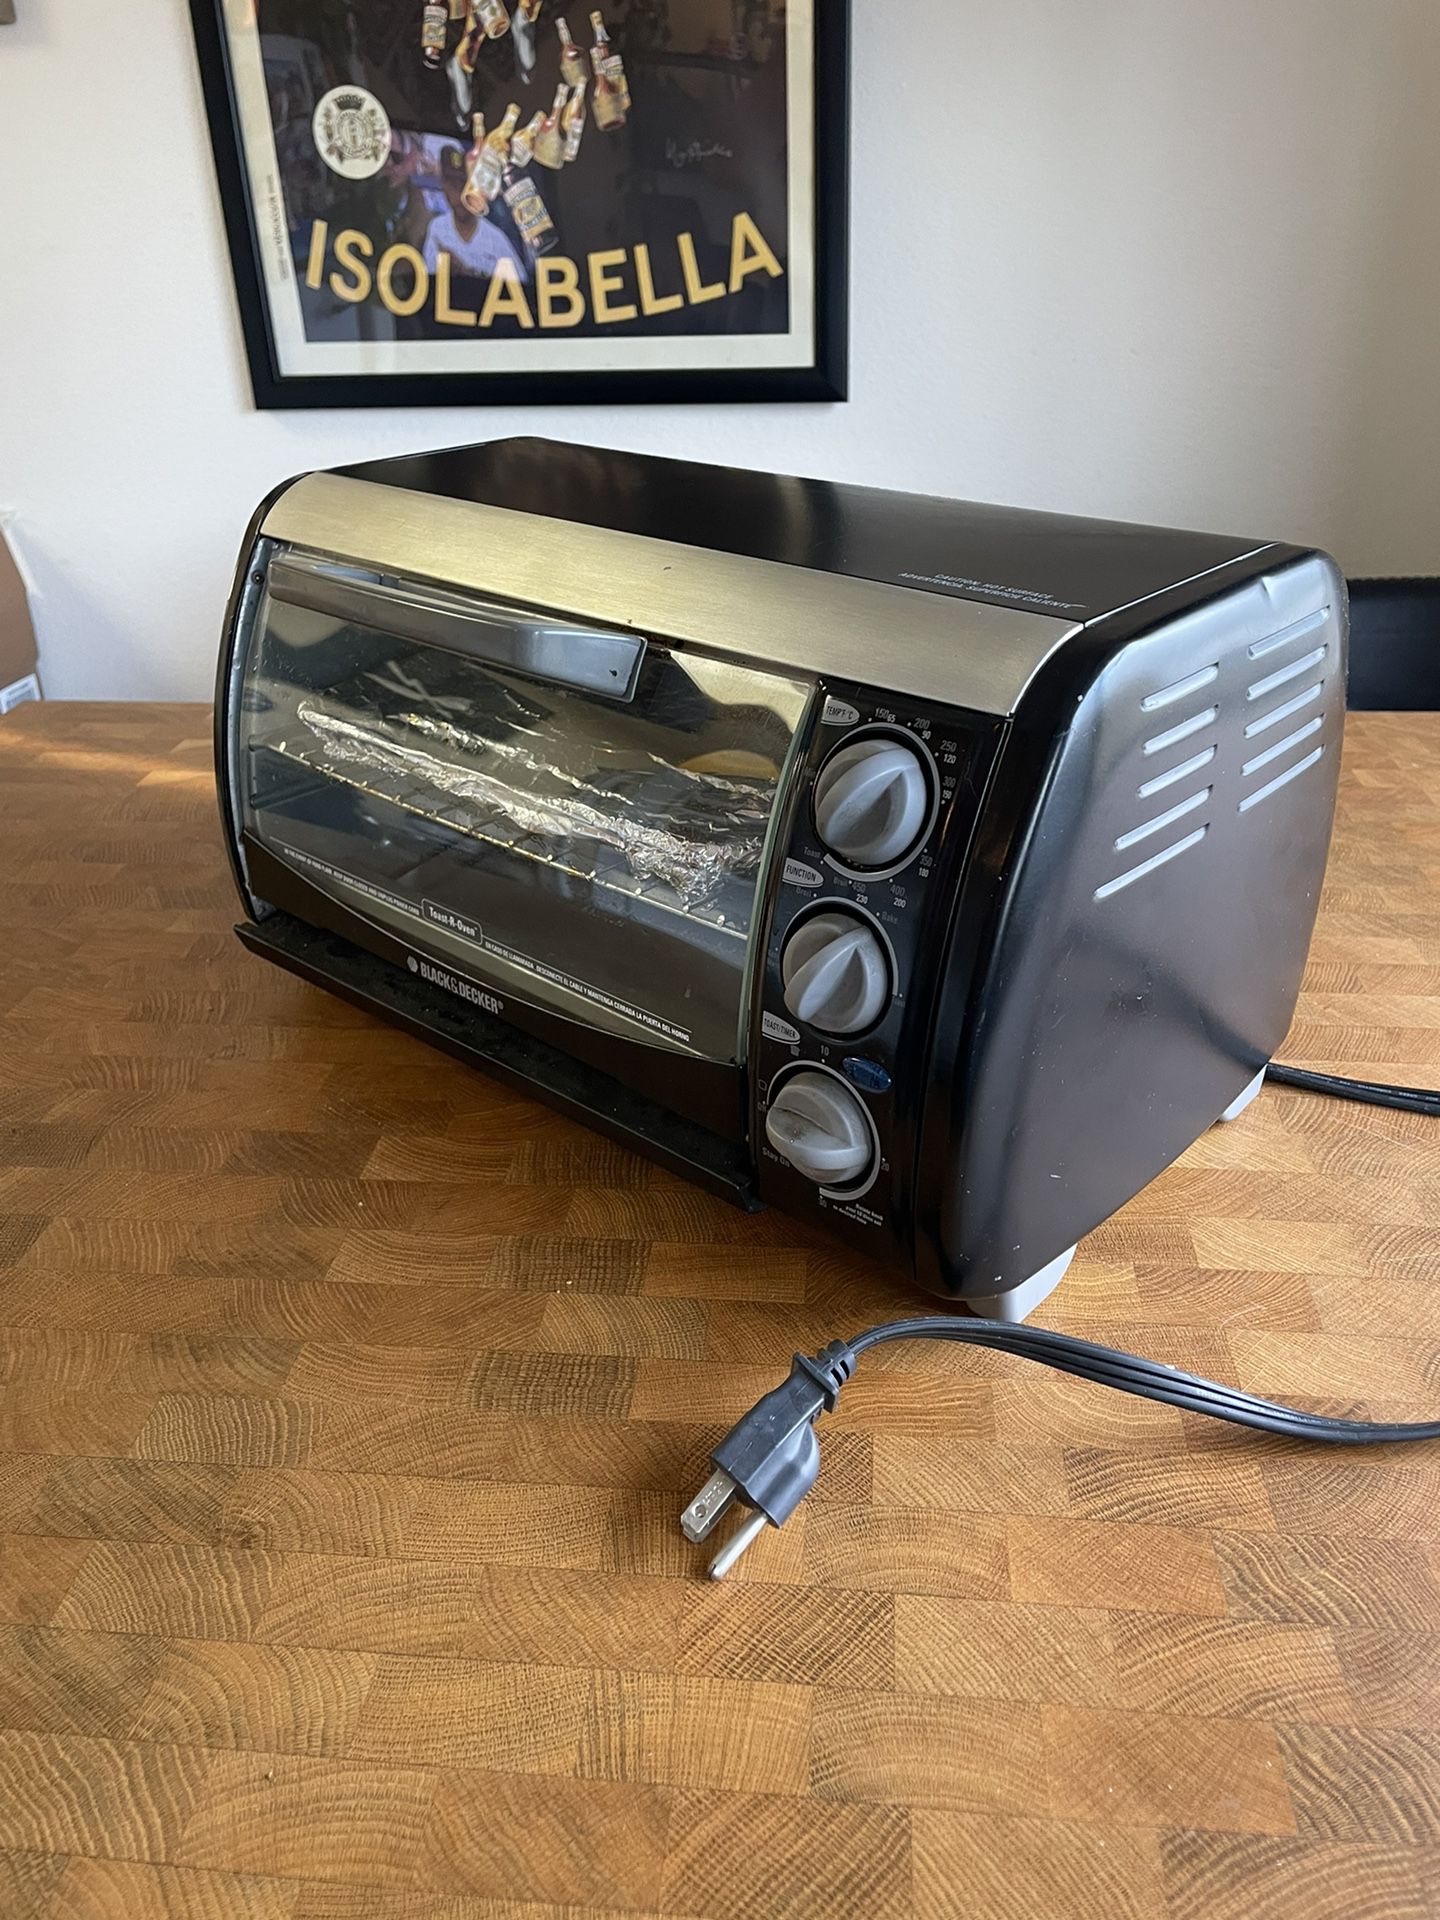 Buy a Toaster Oven, Counter Top Toaster Oven TRO490B